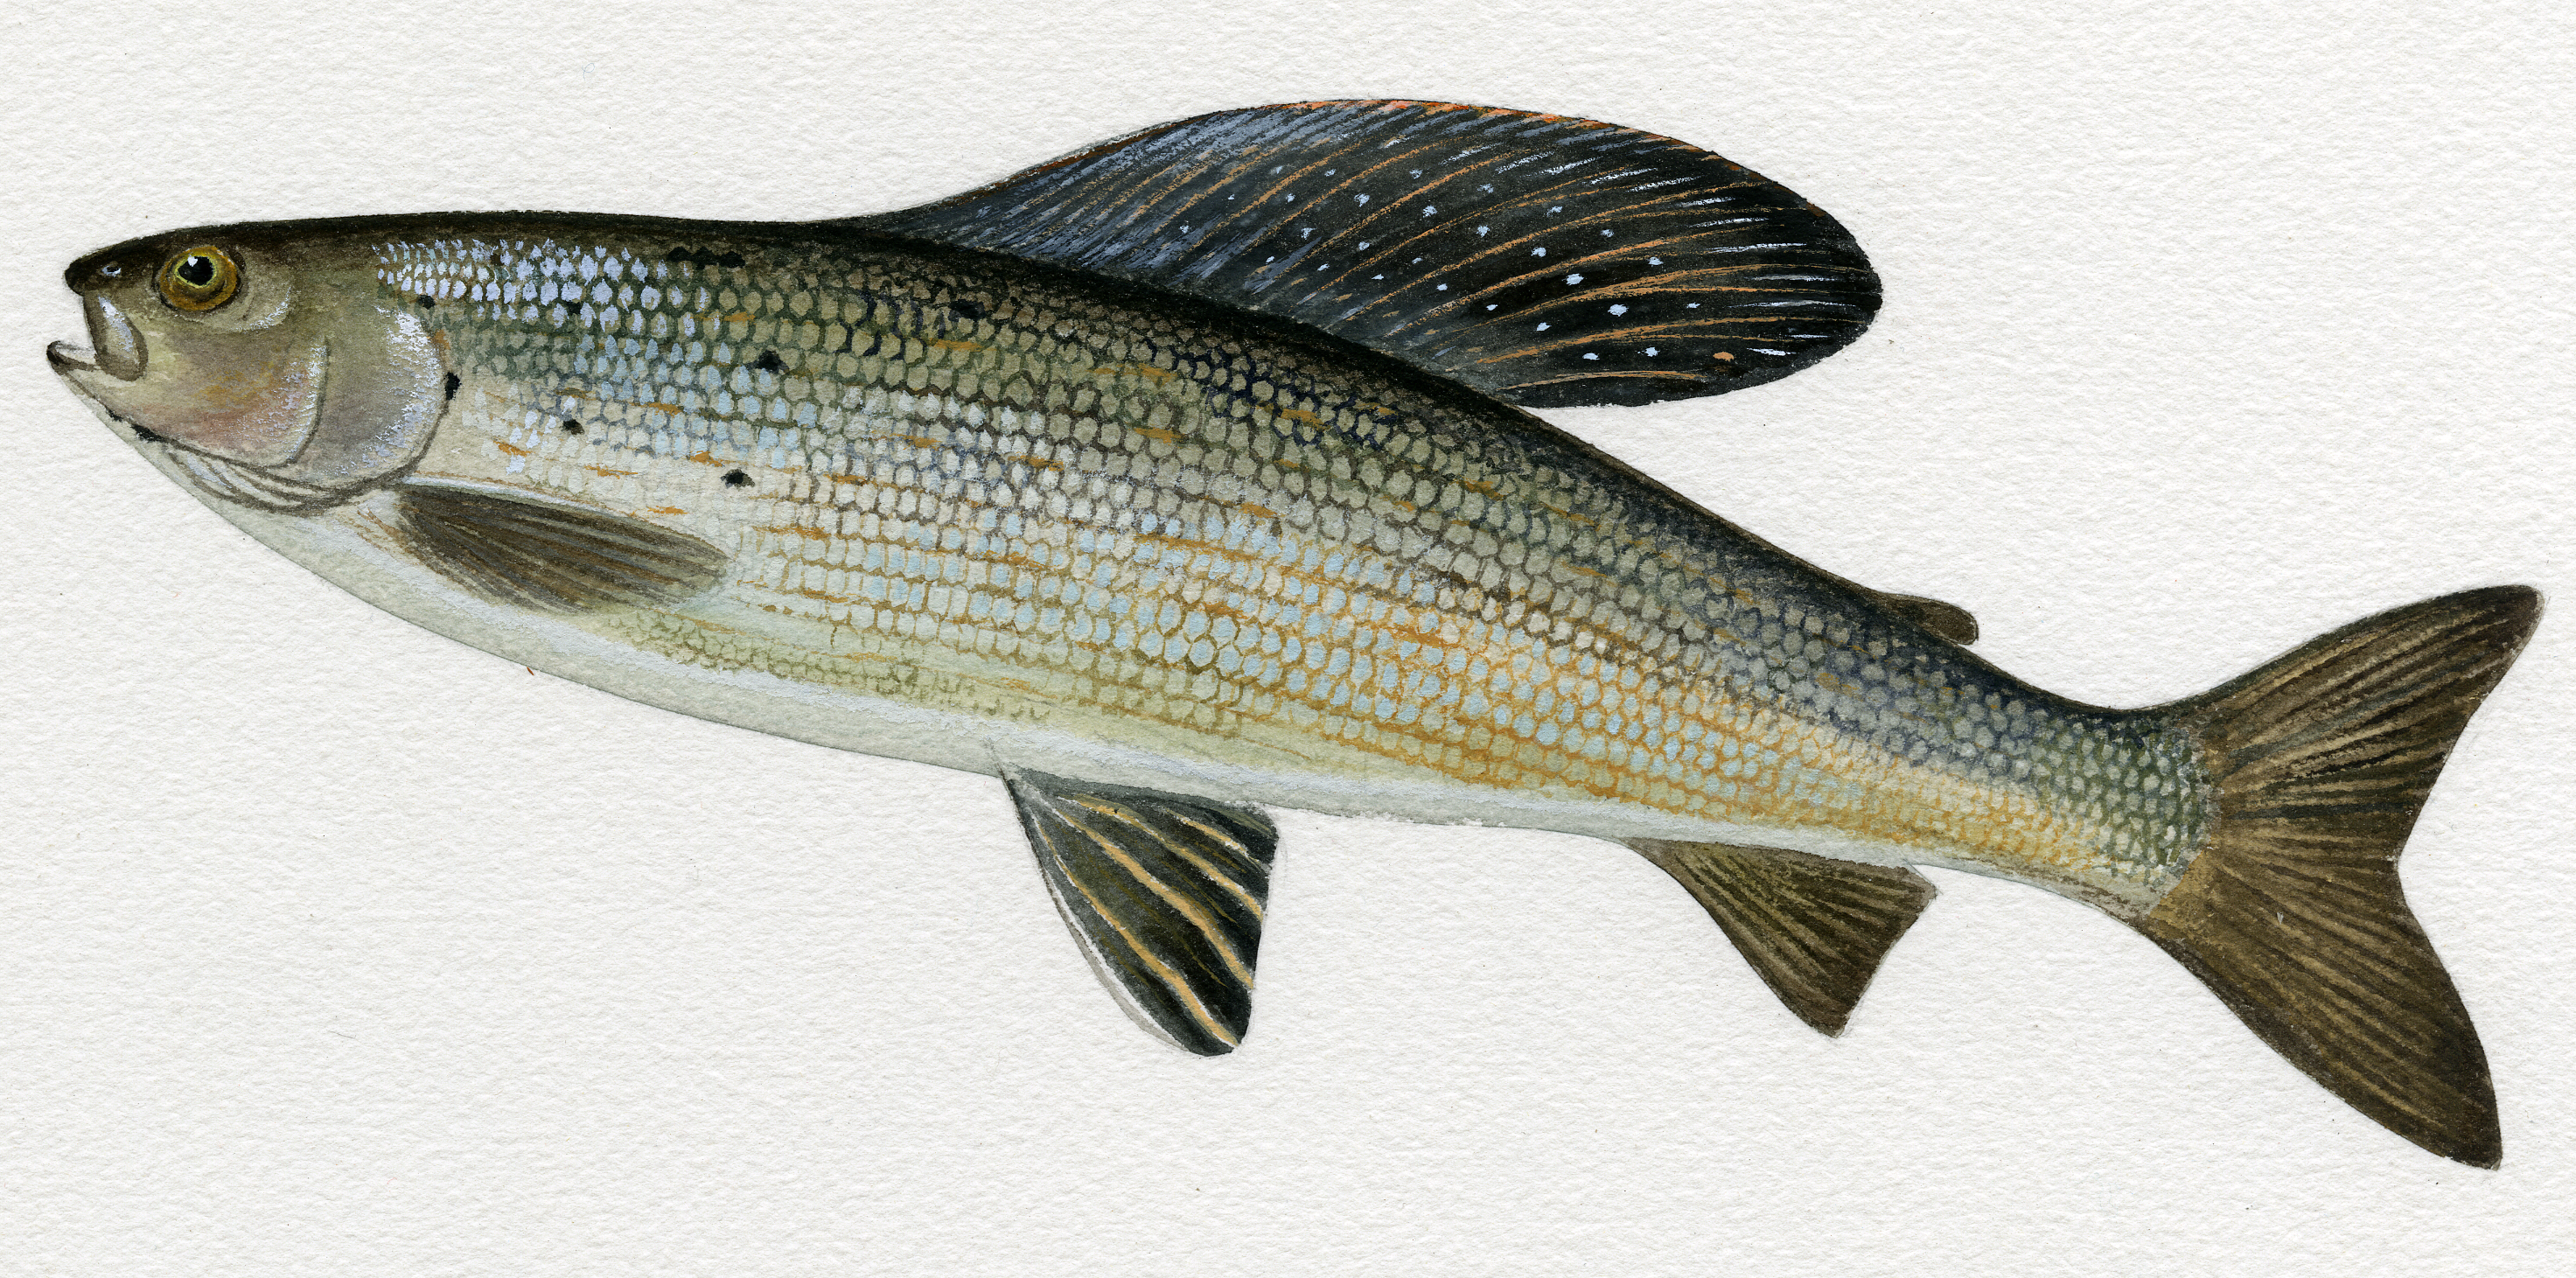 drawing of a speckled green, brown, and yellow fish